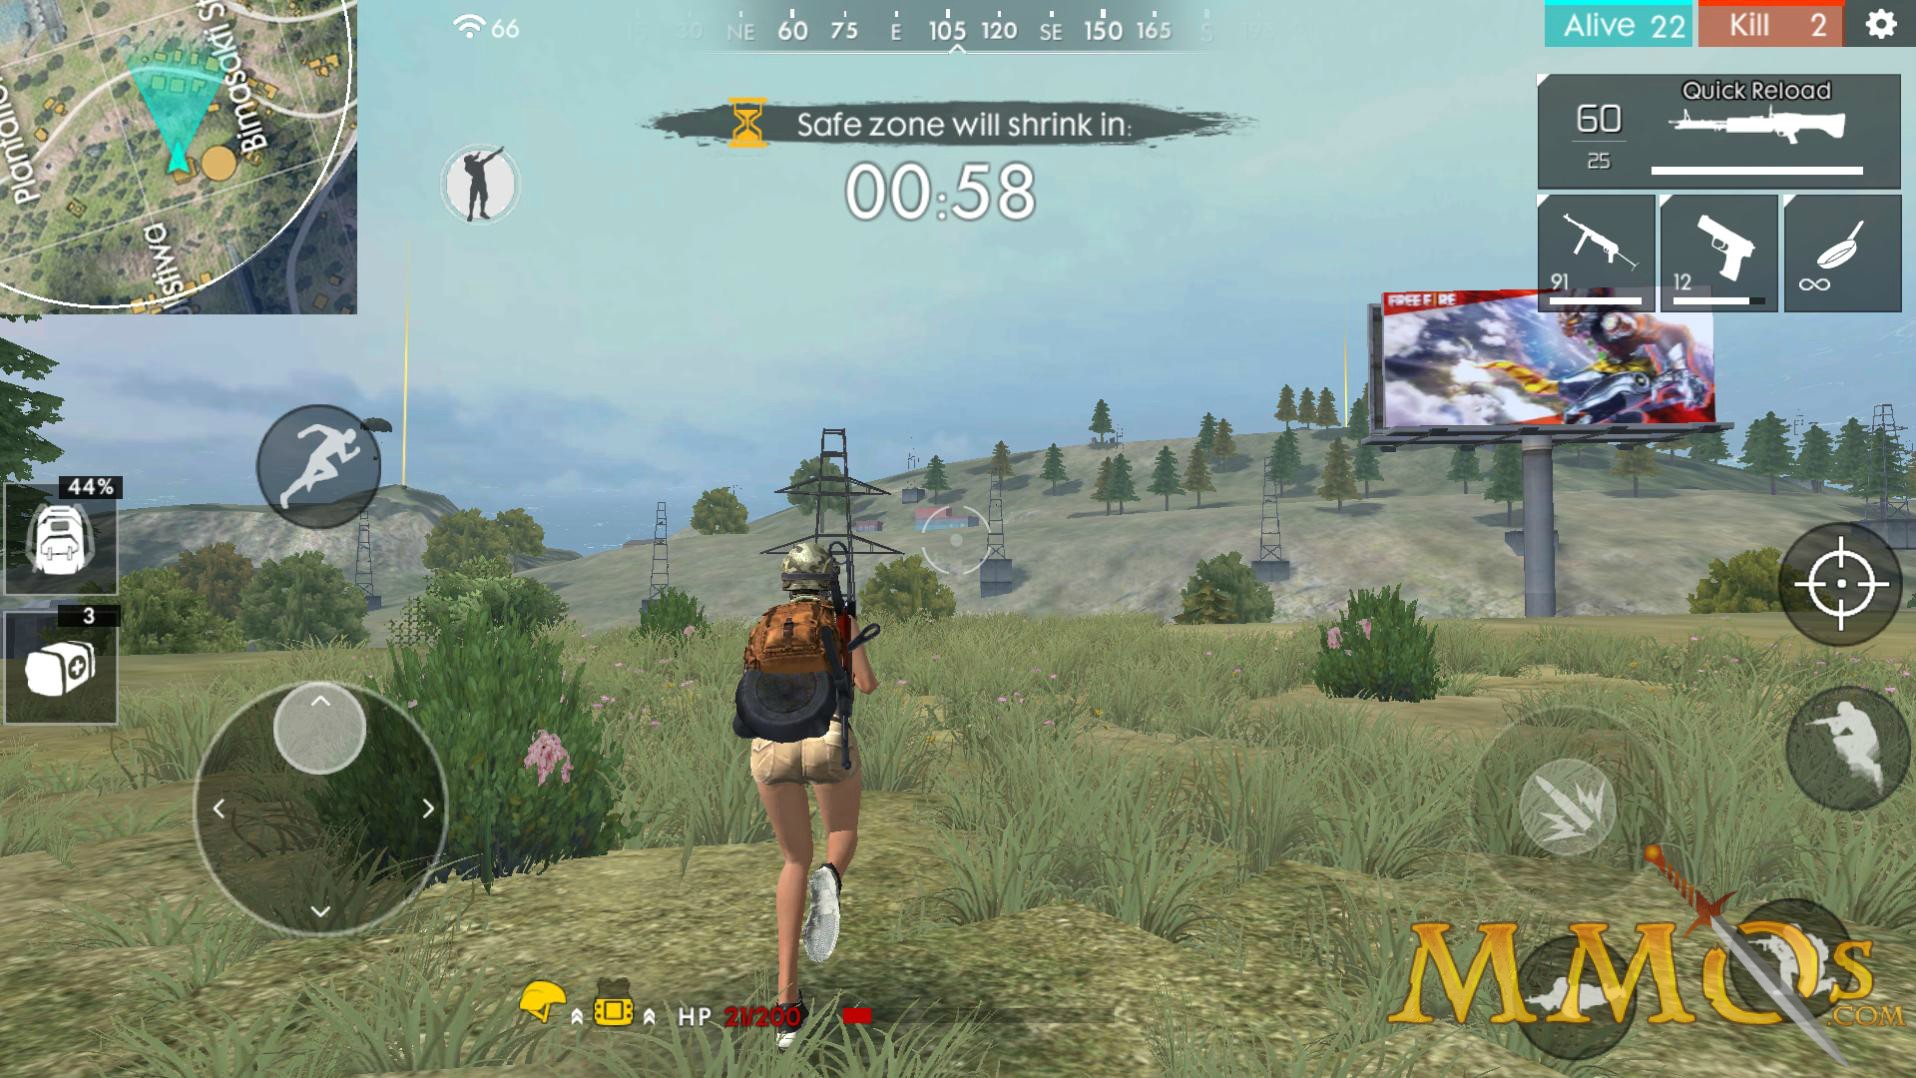 Free Fire/ Garena Free Fire / Free Fire Game Play Online / Garena Free F